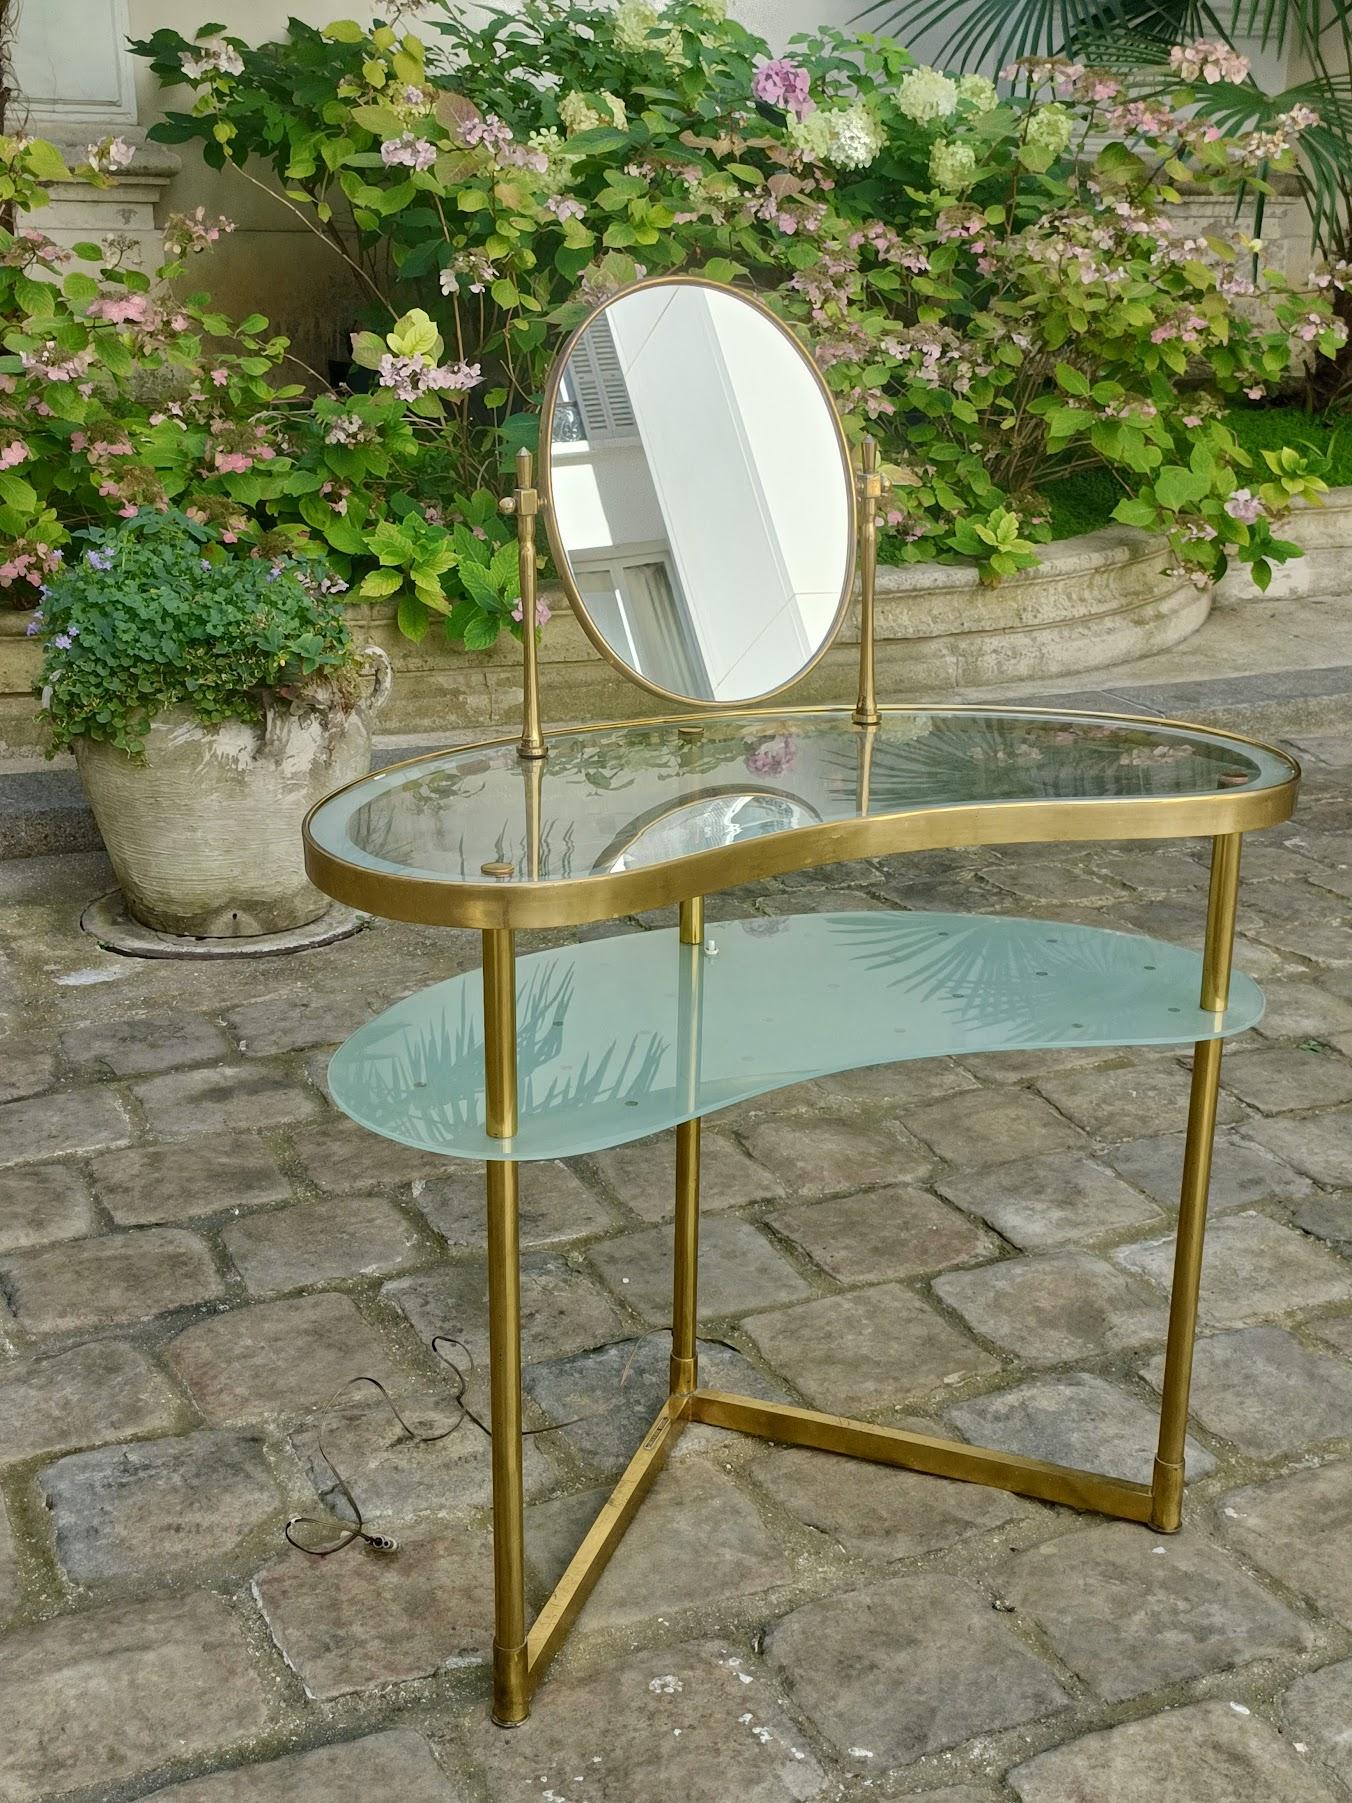 Unique and exceptional piece
.
Brass and glass dressing table, with mirror, lighting and steering wheel, by Luigi Brusotti.
.
Italy, 1940s.
.
So poetic...
.
Width : 92cm at the widest
Height : 76cm
Depth : 43cm

Mirror height : 40cm
Mirror width :